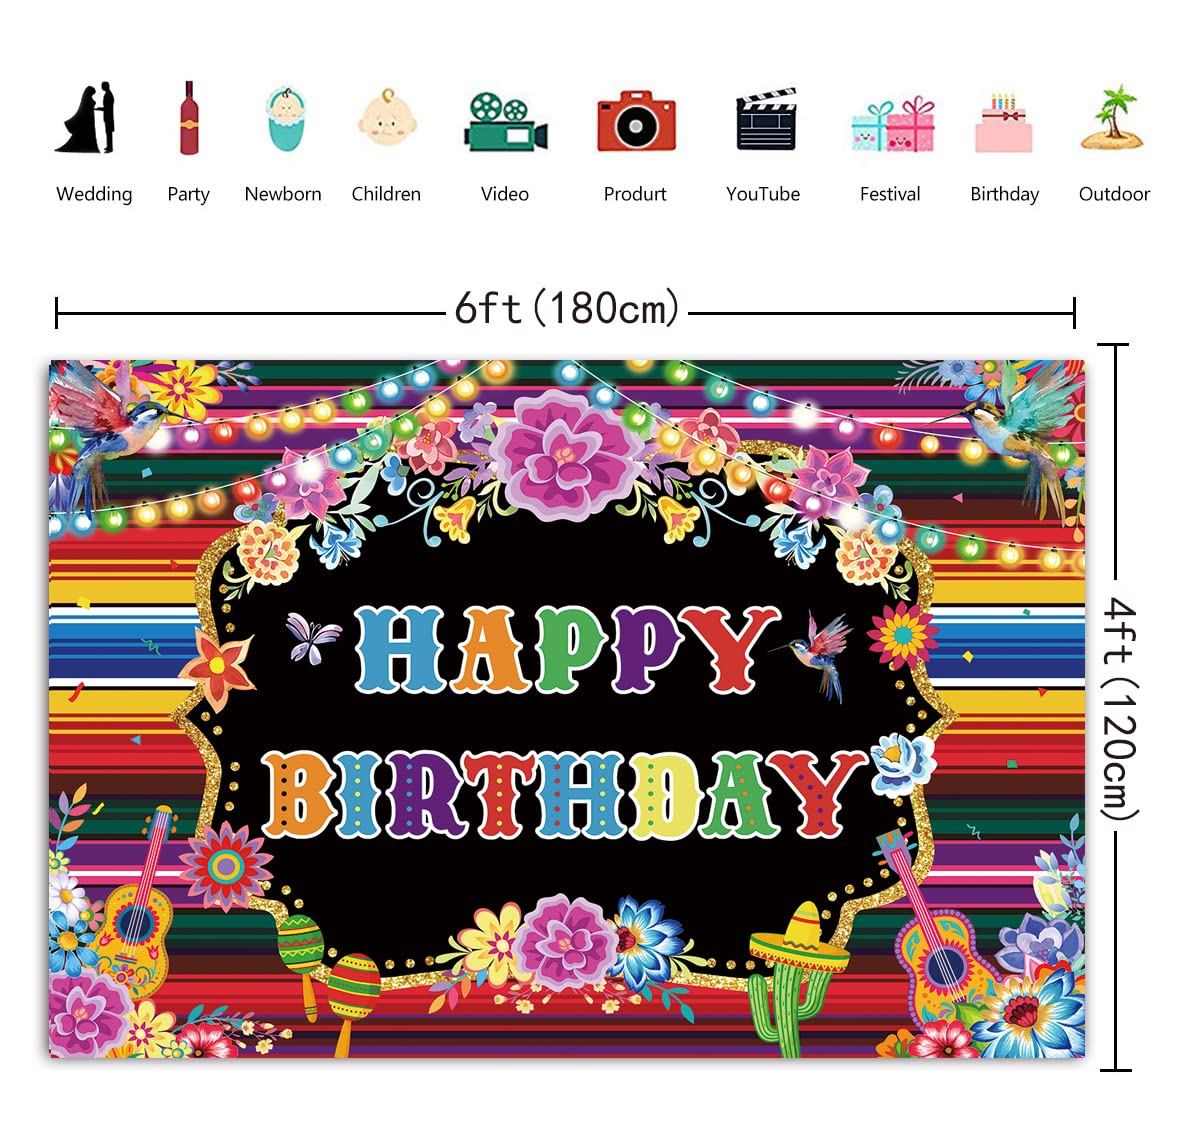 Mexican Birthday Backdrop for Photography Fiesta Themed Party Banners Fiesta Birthday Party Decor Supplies Photo Booth Background (6x4FT: 72x48 inch)